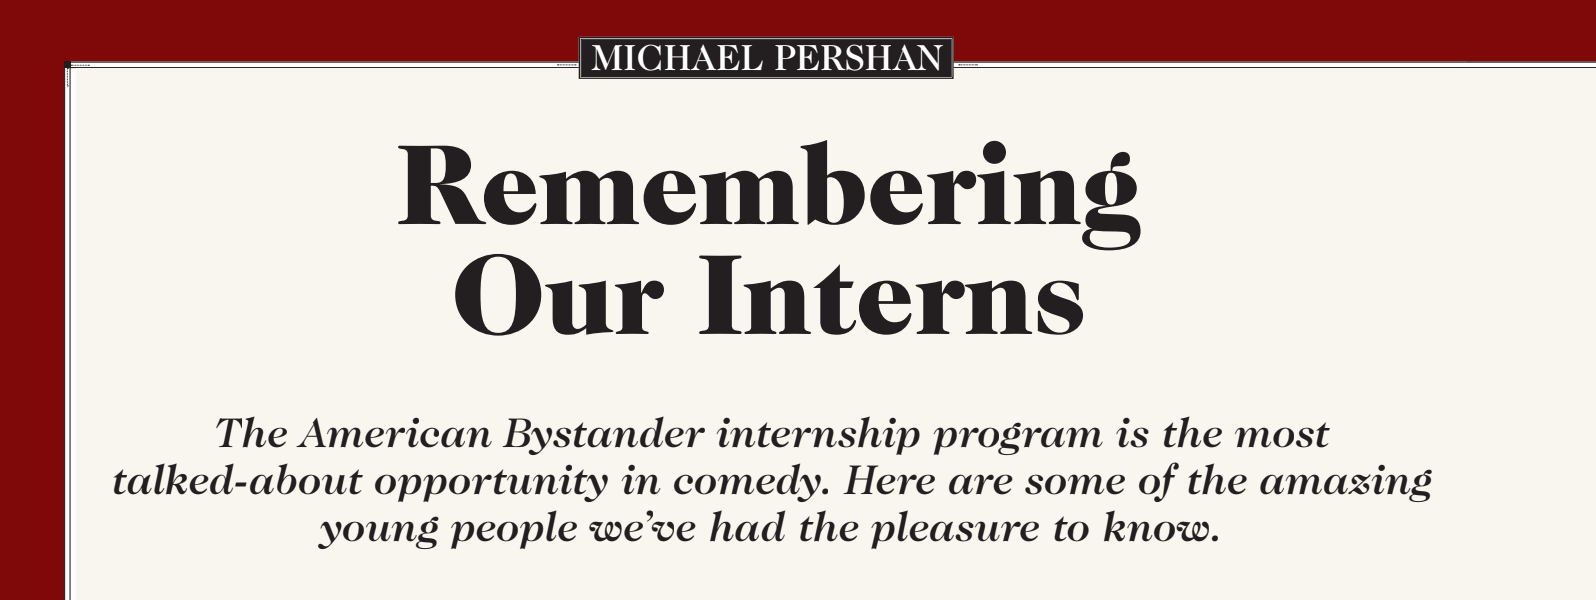 Making Things is Hard - by Michael Pershan - Pershmail